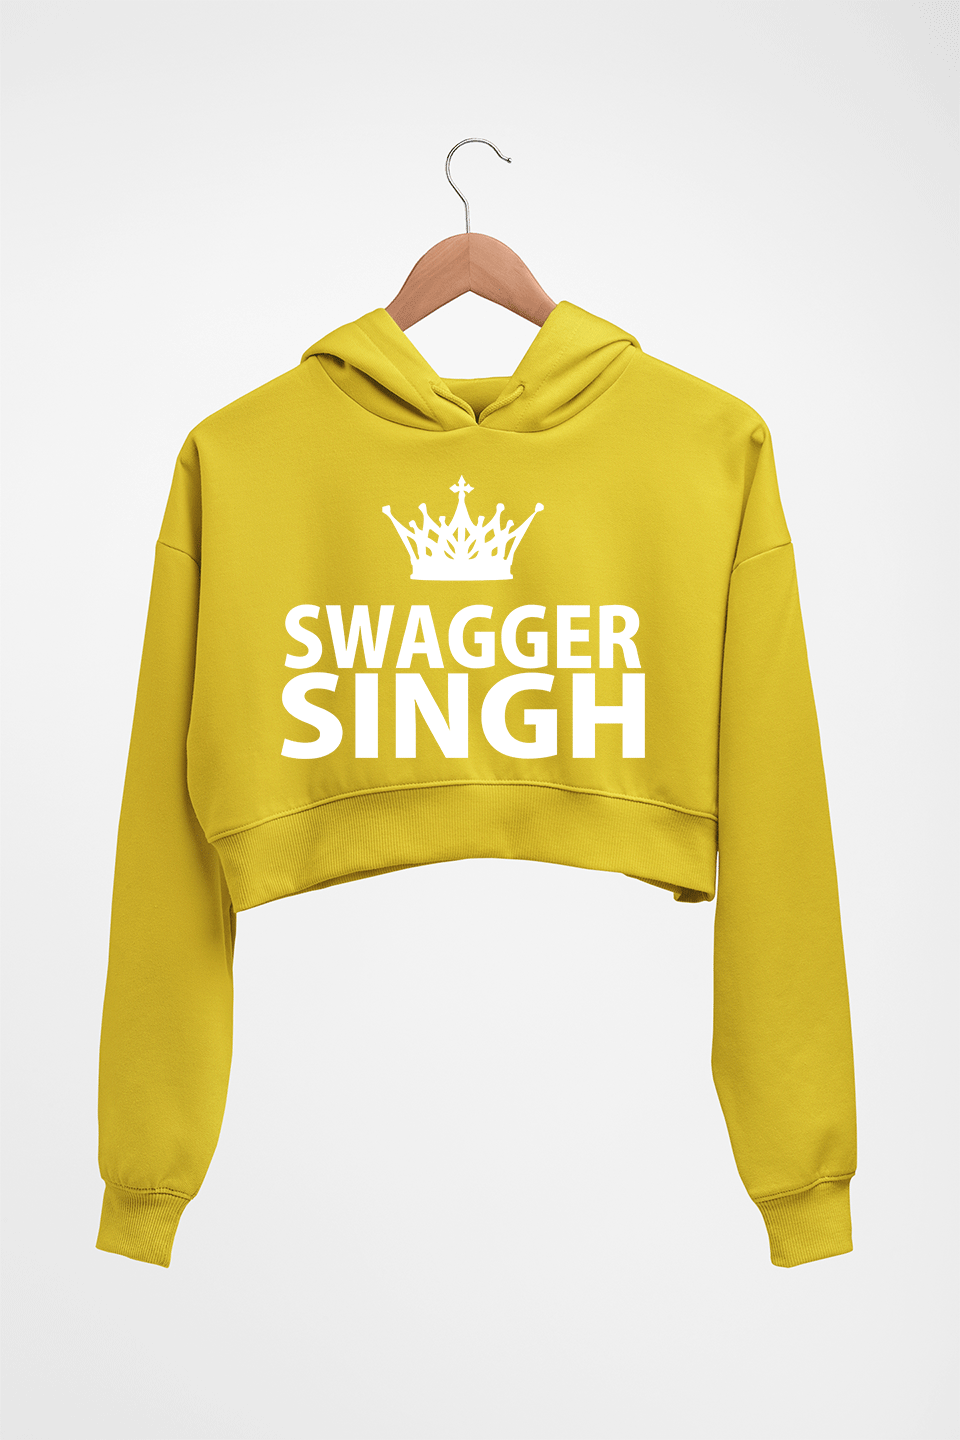 Swagger Singh Crop HOODIE FOR WOMEN